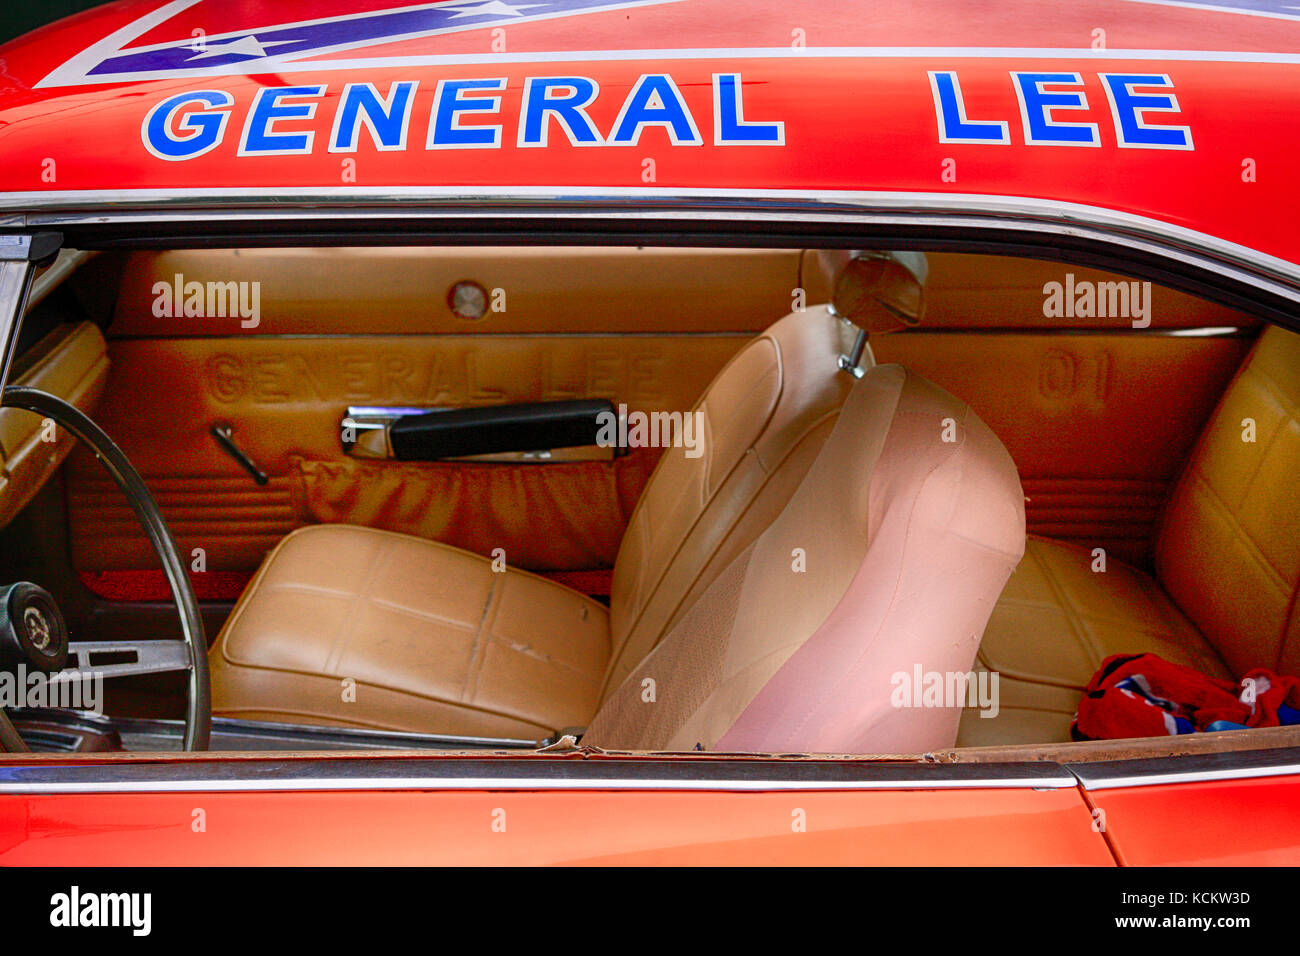 The General Lee - Dodge Charger vehicle of Dukes of Hazzard fame Stock  Photo - Alamy